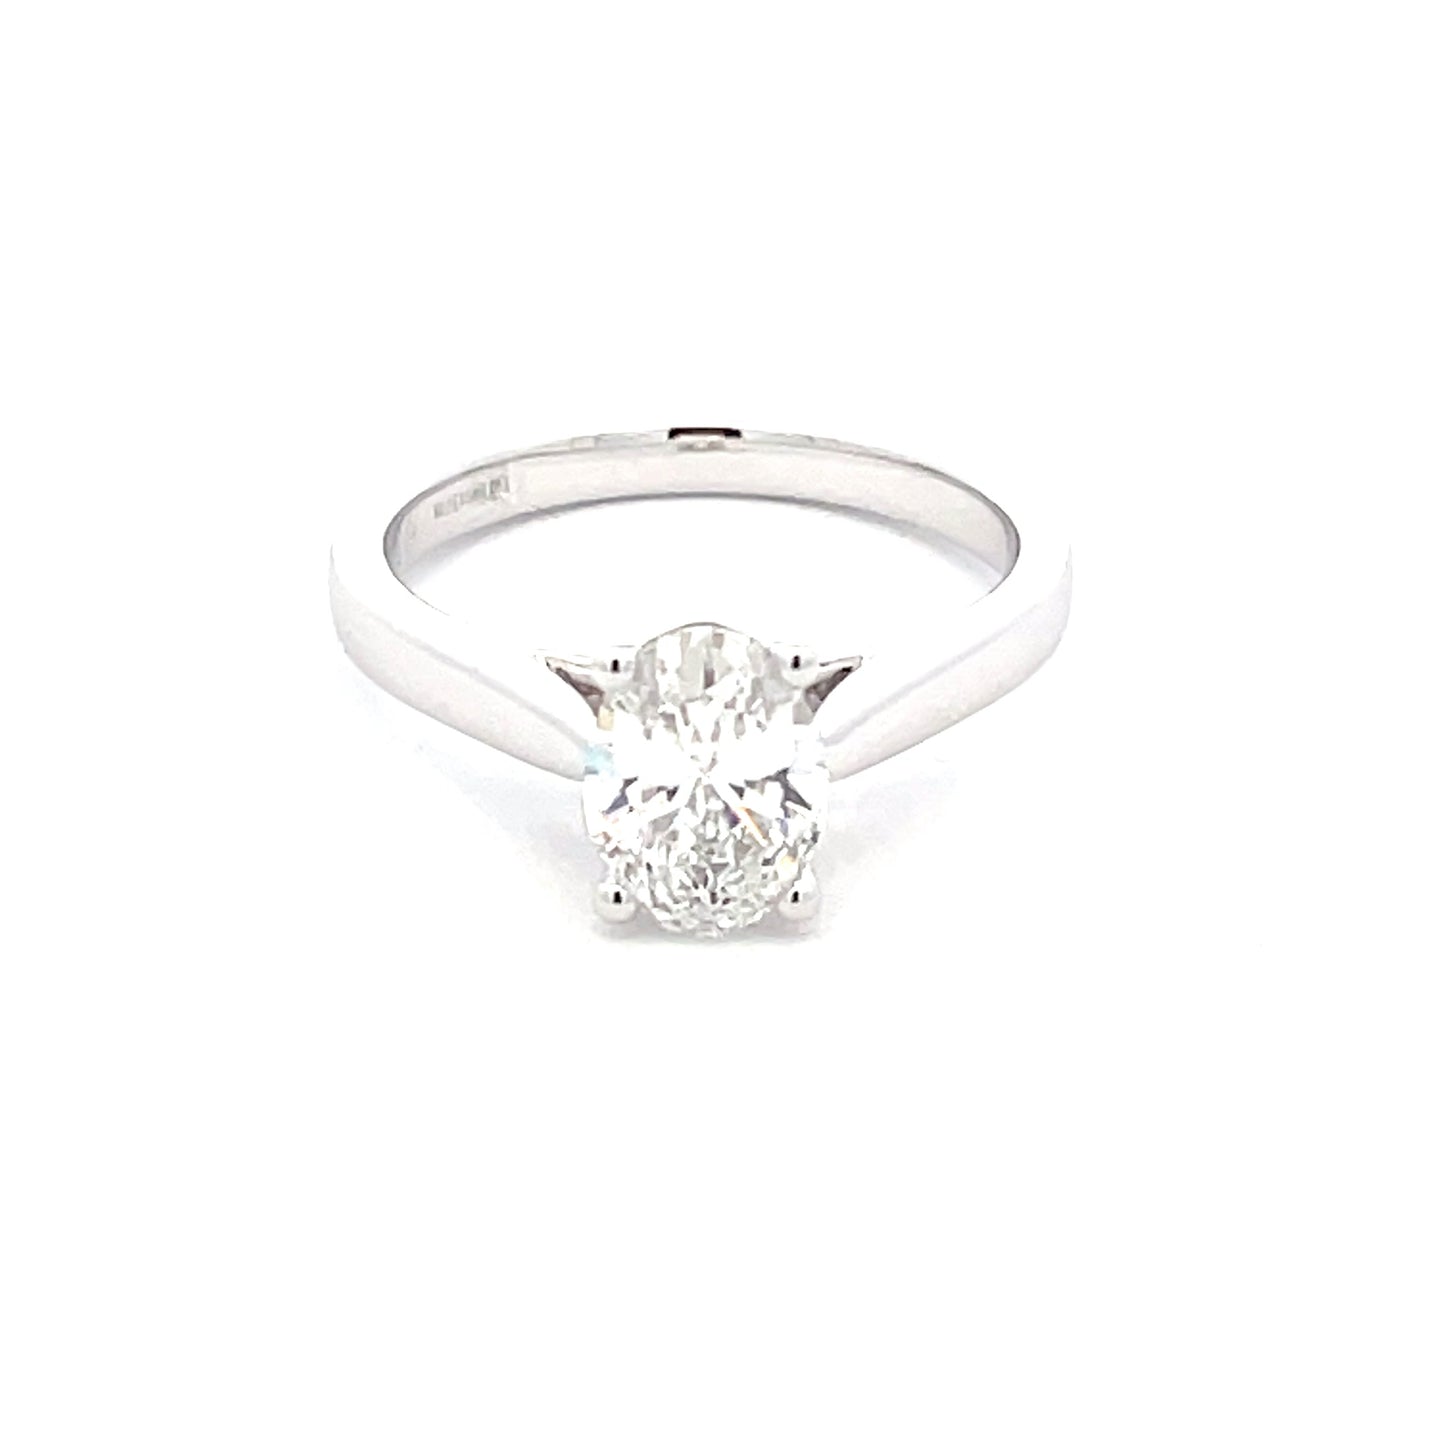 LAB GROWN OVAL SHAPED DIAMOND SOLITAIRE RING - 1.22CTS  Gardiner Brothers   